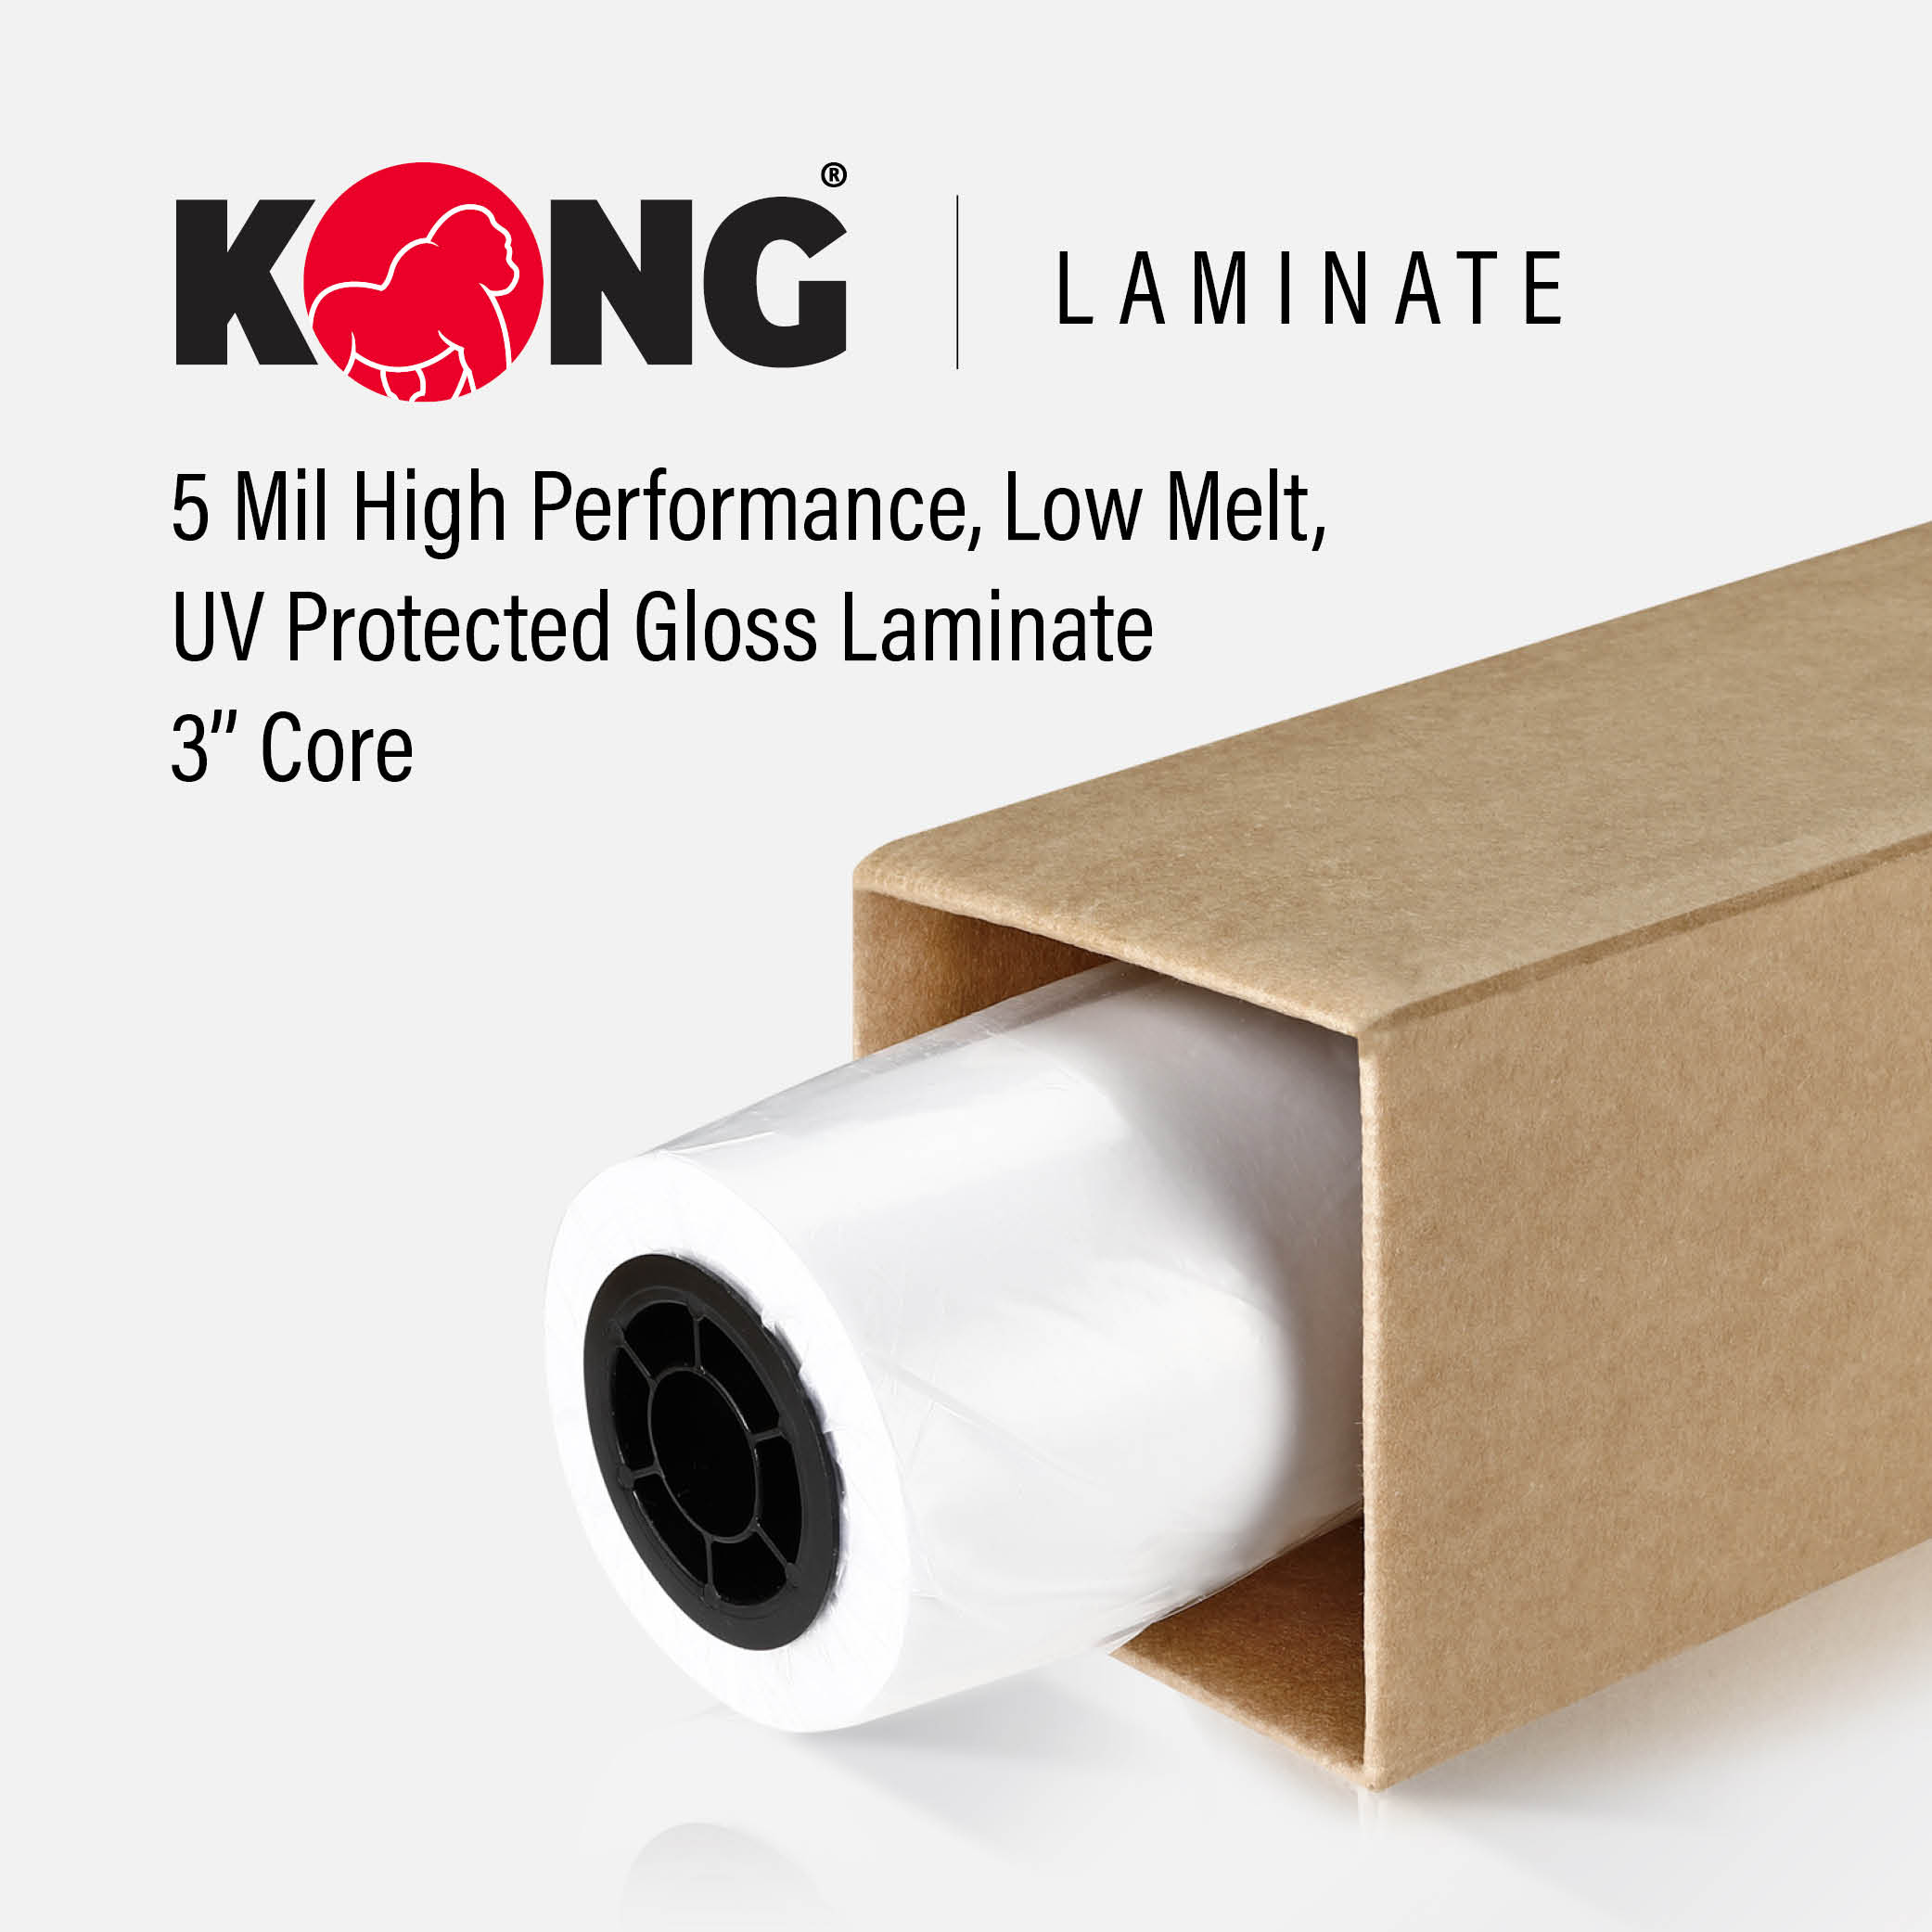 62'' x 250' Roll - 5 MIL High Performance, Low Melt, UV Protected Gloss Laminate - 3'' Core